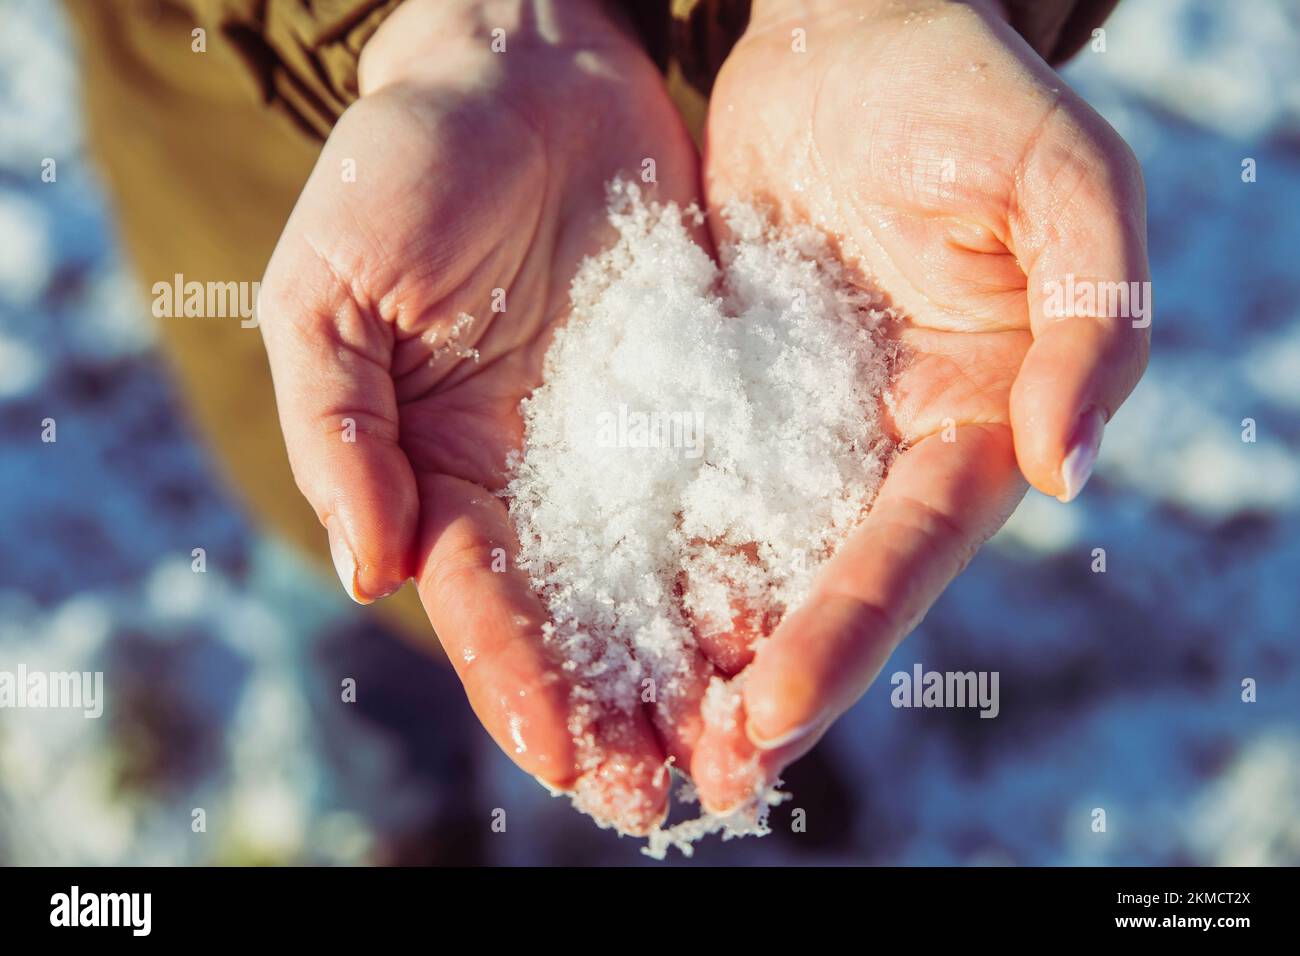 Girl holding snow in her hands. Close-up Stock Photo